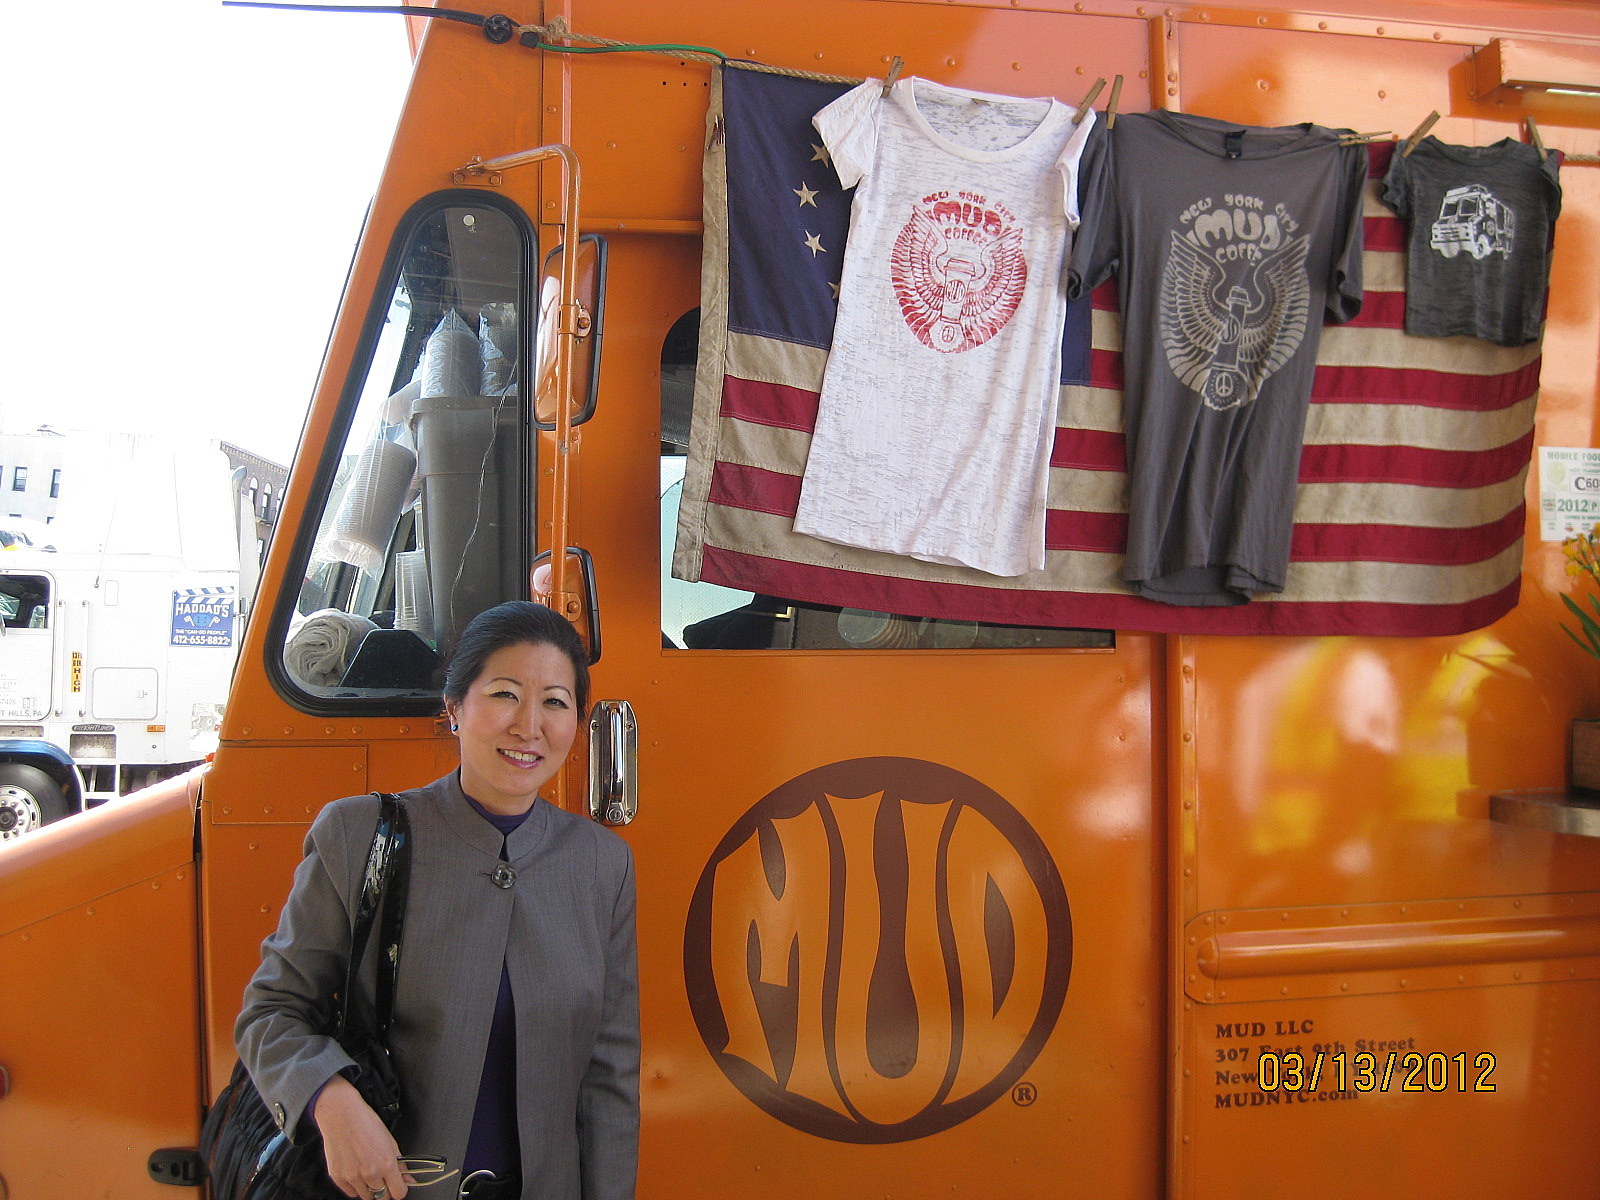 Lil Rhee in front of the Mud coffee truck